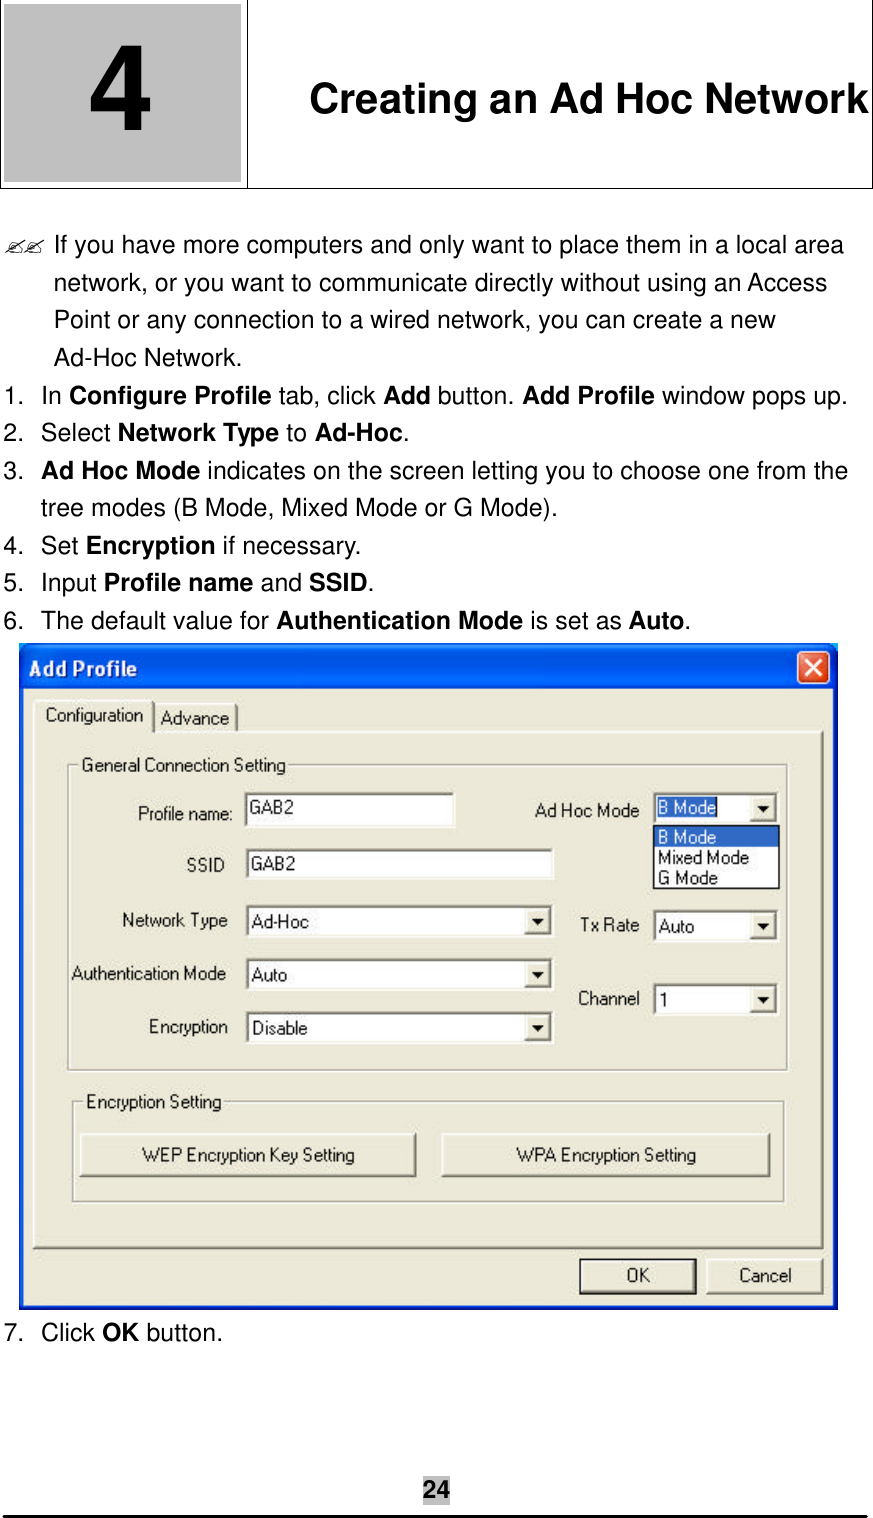   24 4  4. Creating an Ad Hoc Network  ?? If you have more computers and only want to place them in a local area network, or you want to communicate directly without using an Access Point or any connection to a wired network, you can create a new Ad-Hoc Network. 1. In Configure Profile tab, click Add button. Add Profile window pops up. 2. Select Network Type to Ad-Hoc. 3. Ad Hoc Mode indicates on the screen letting you to choose one from the tree modes (B Mode, Mixed Mode or G Mode). 4. Set Encryption if necessary. 5. Input Profile name and SSID. 6. The default value for Authentication Mode is set as Auto.  7. Click OK button. 